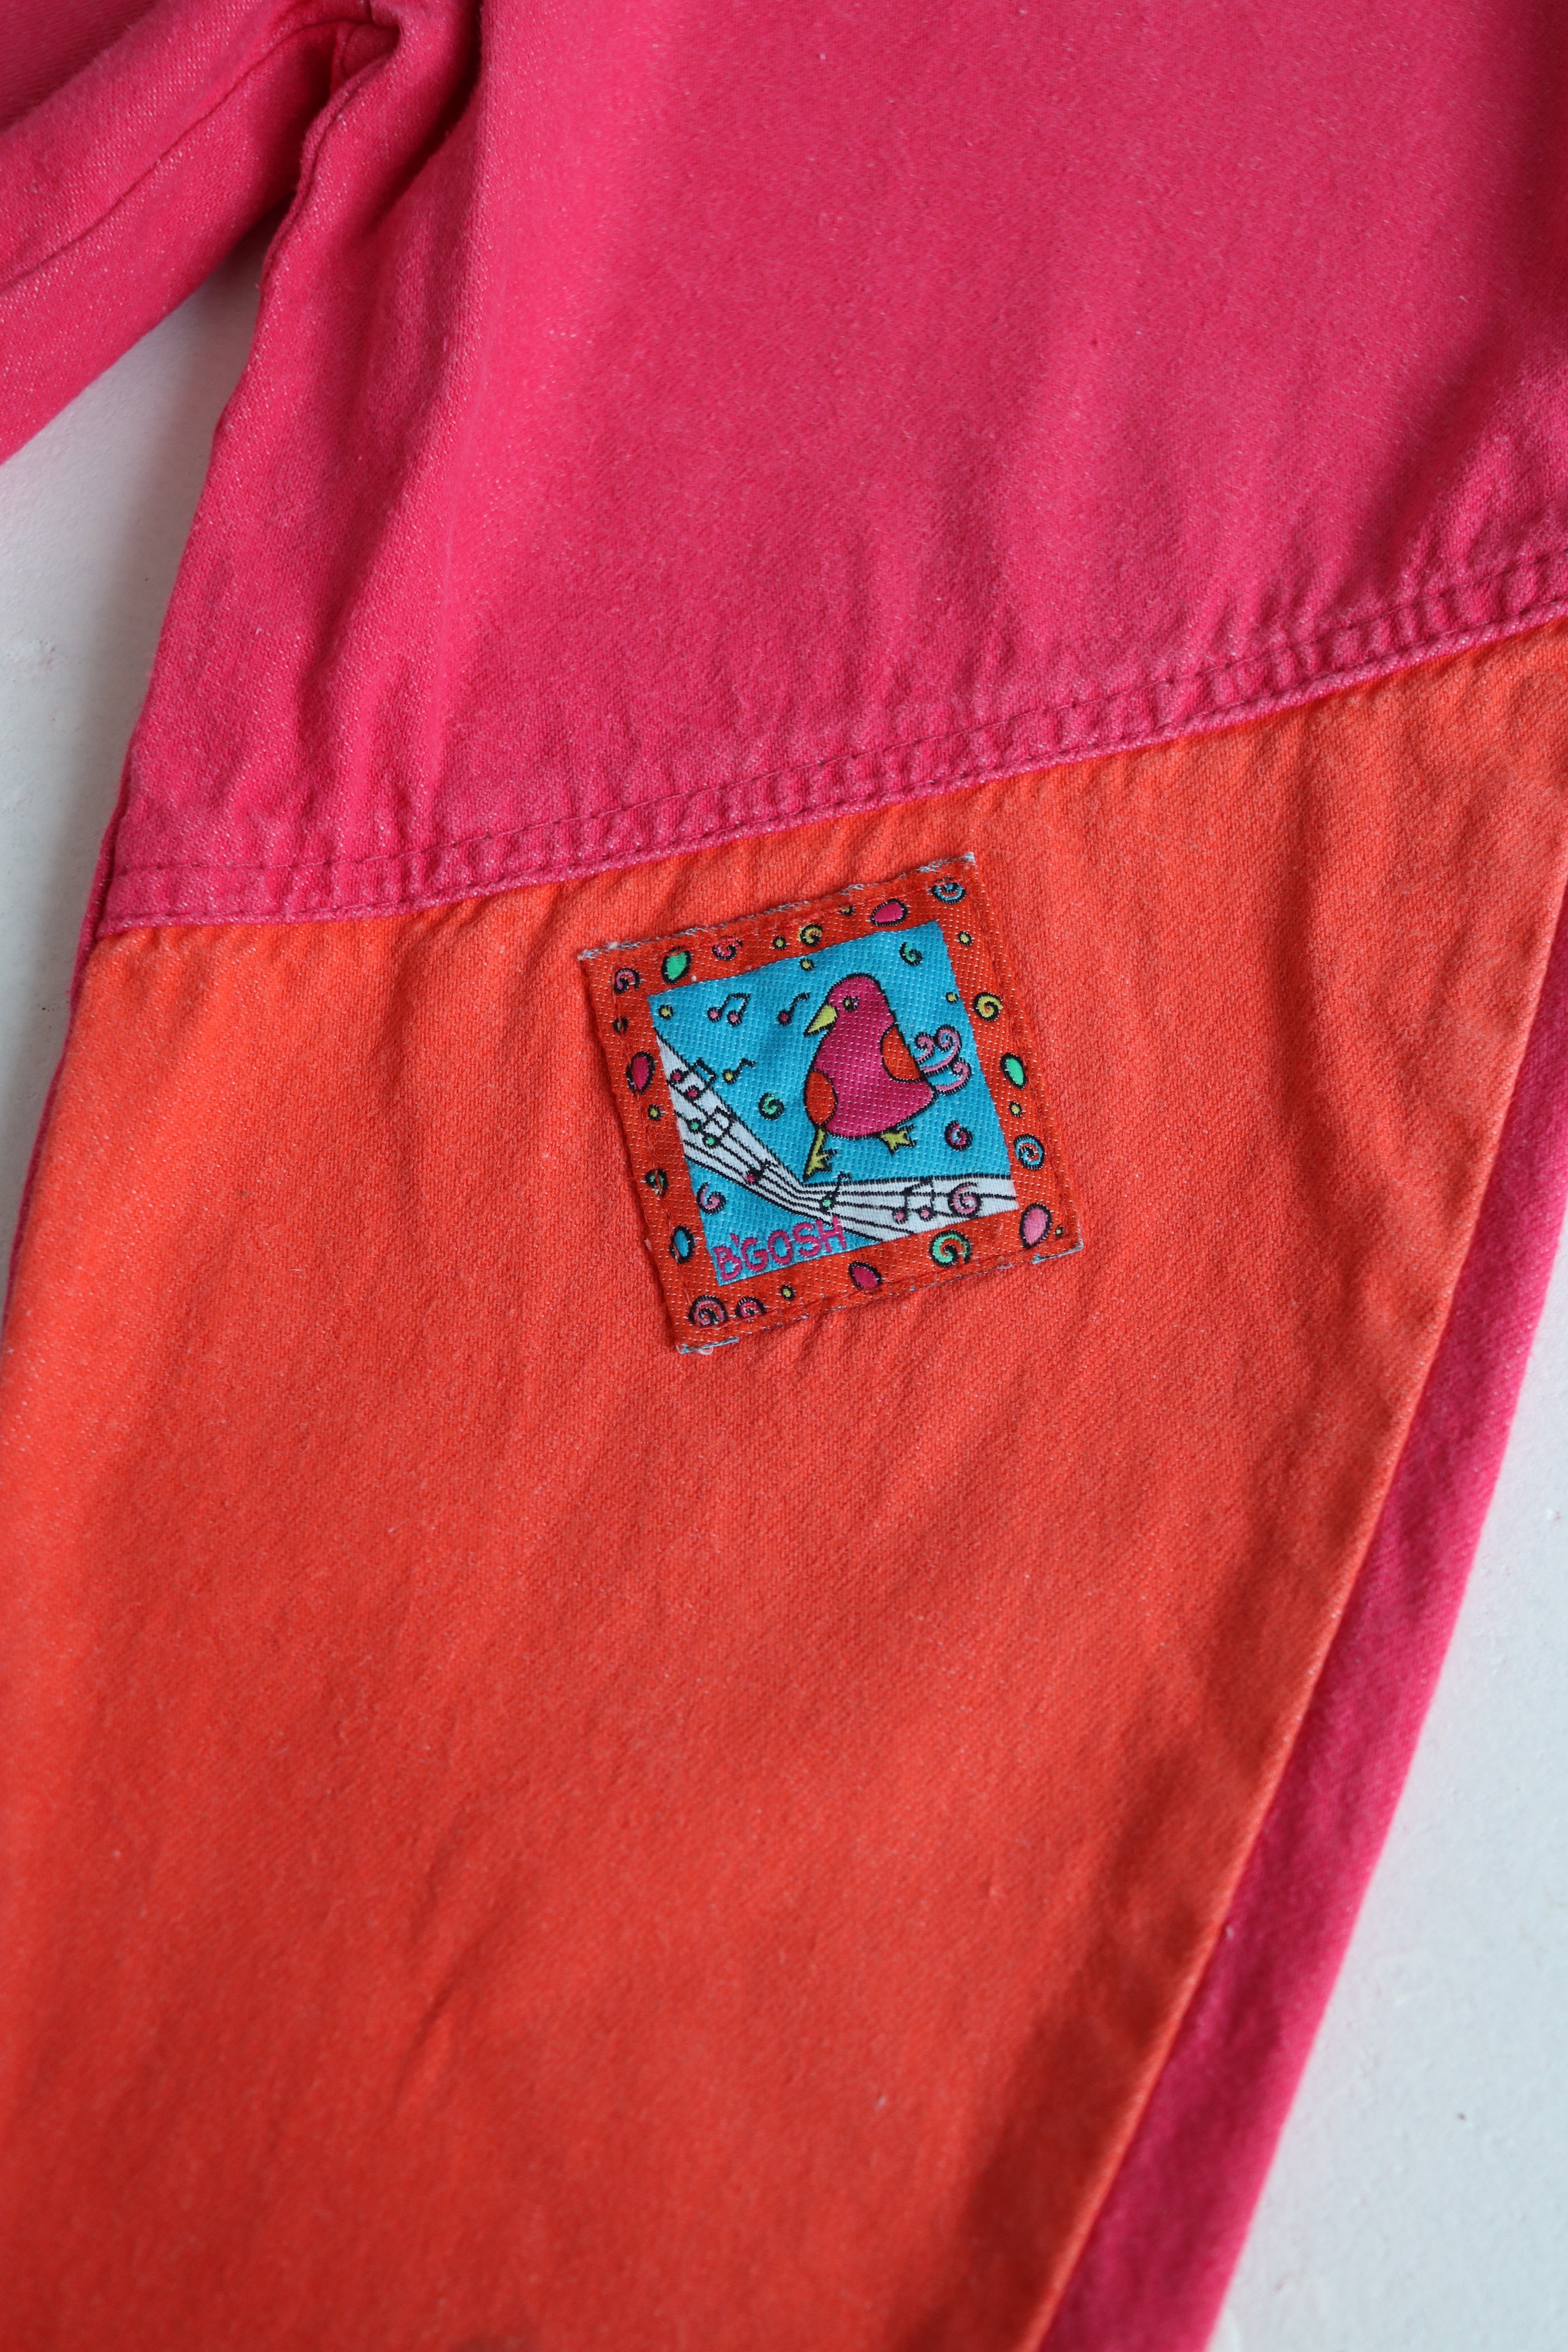 Vintagepink OshKosh pants with bird patch - Size 4 years - made in USA